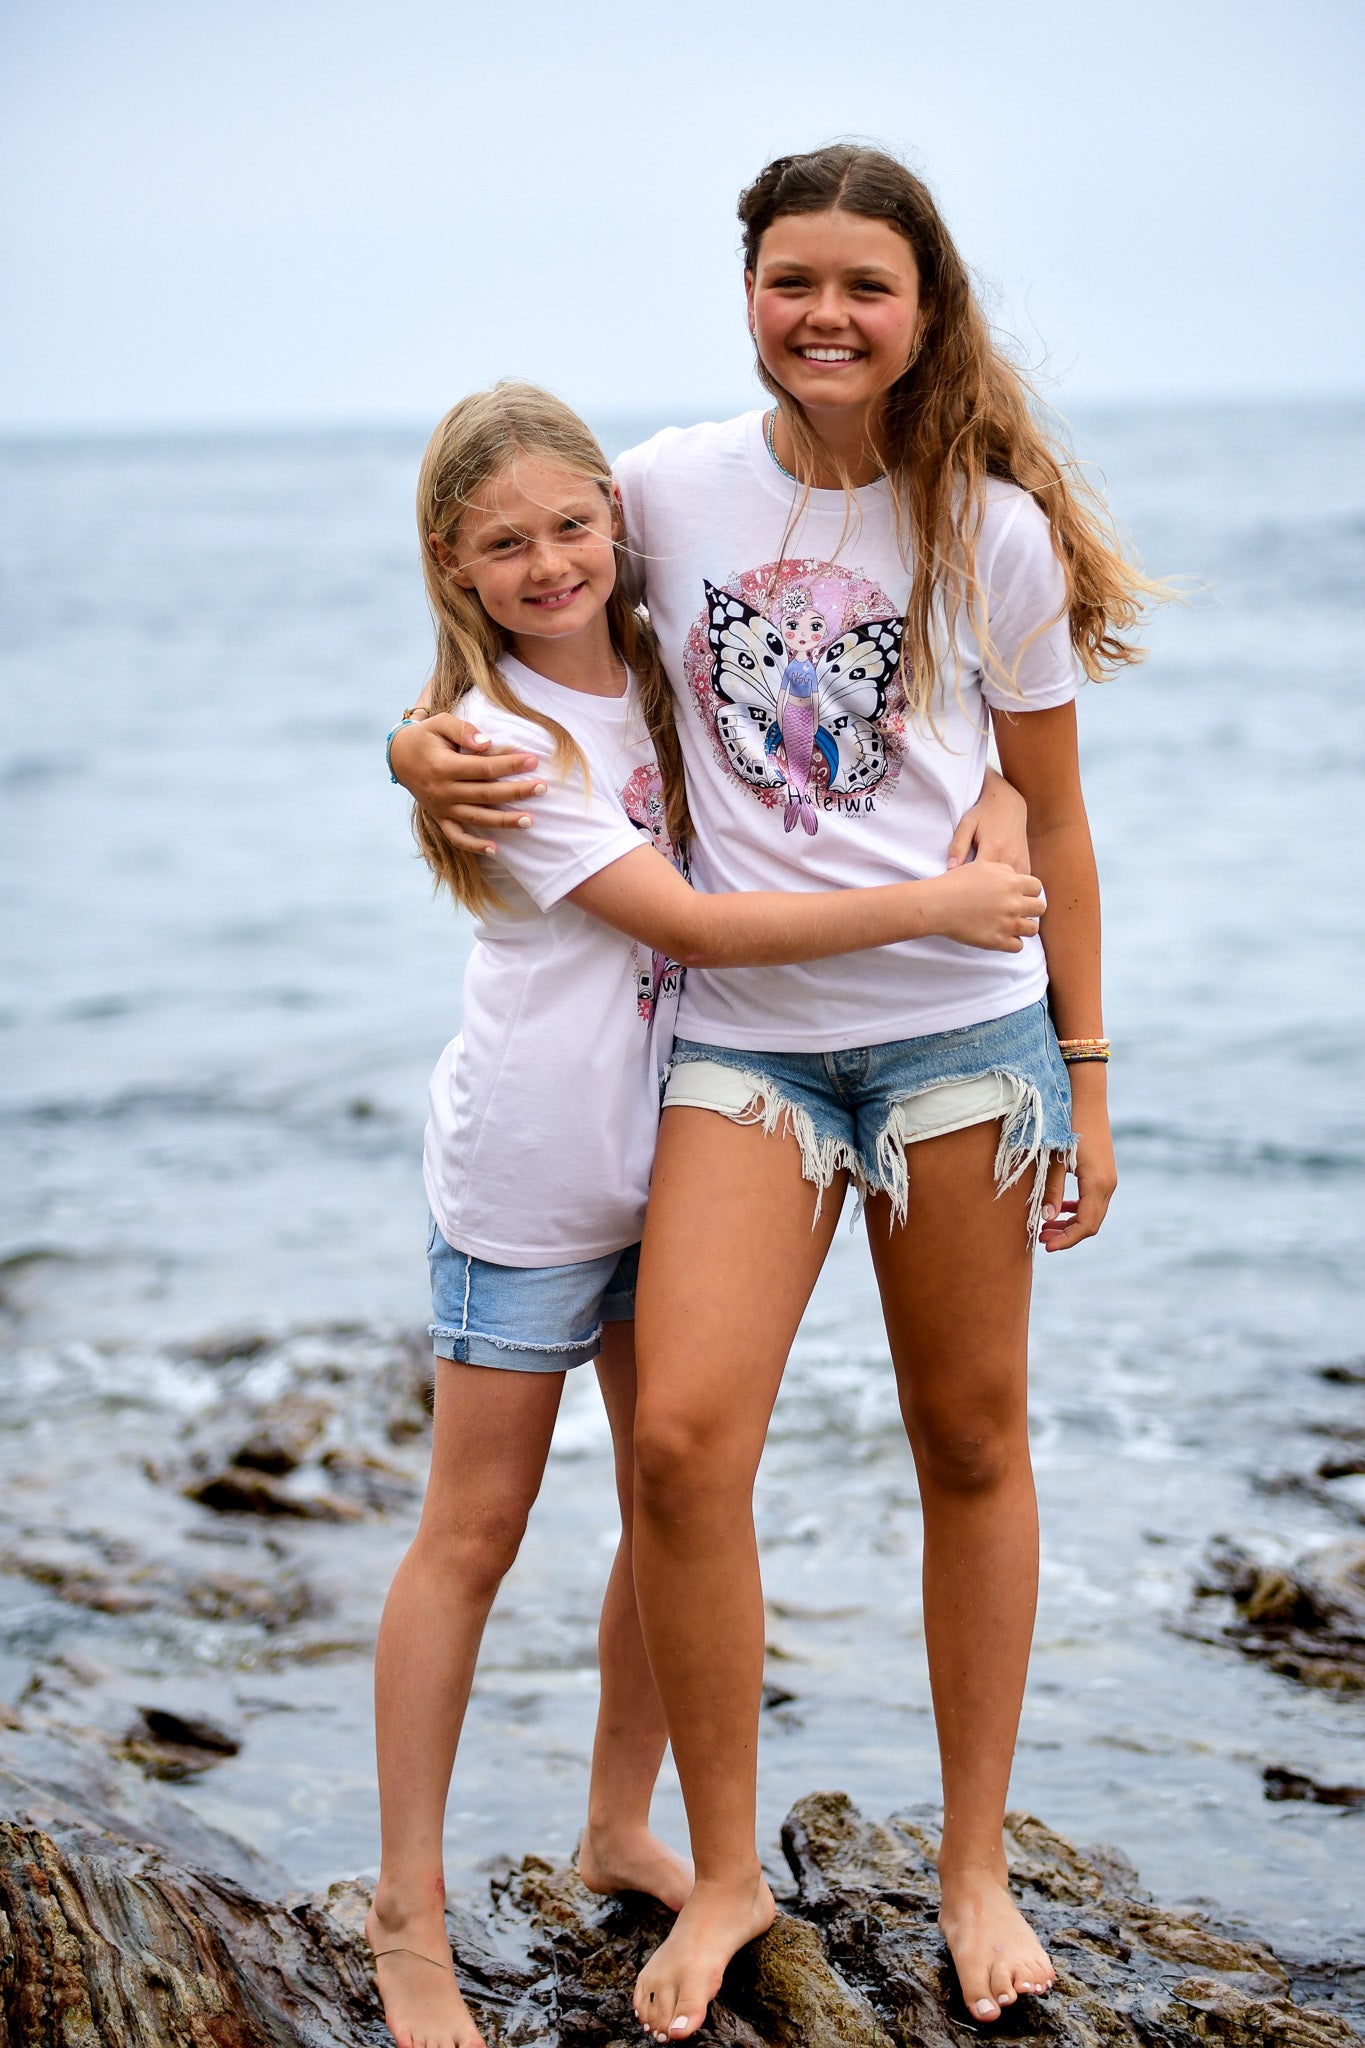 North Shore Girls illustrated graphic tees designed  by Nadia Watts